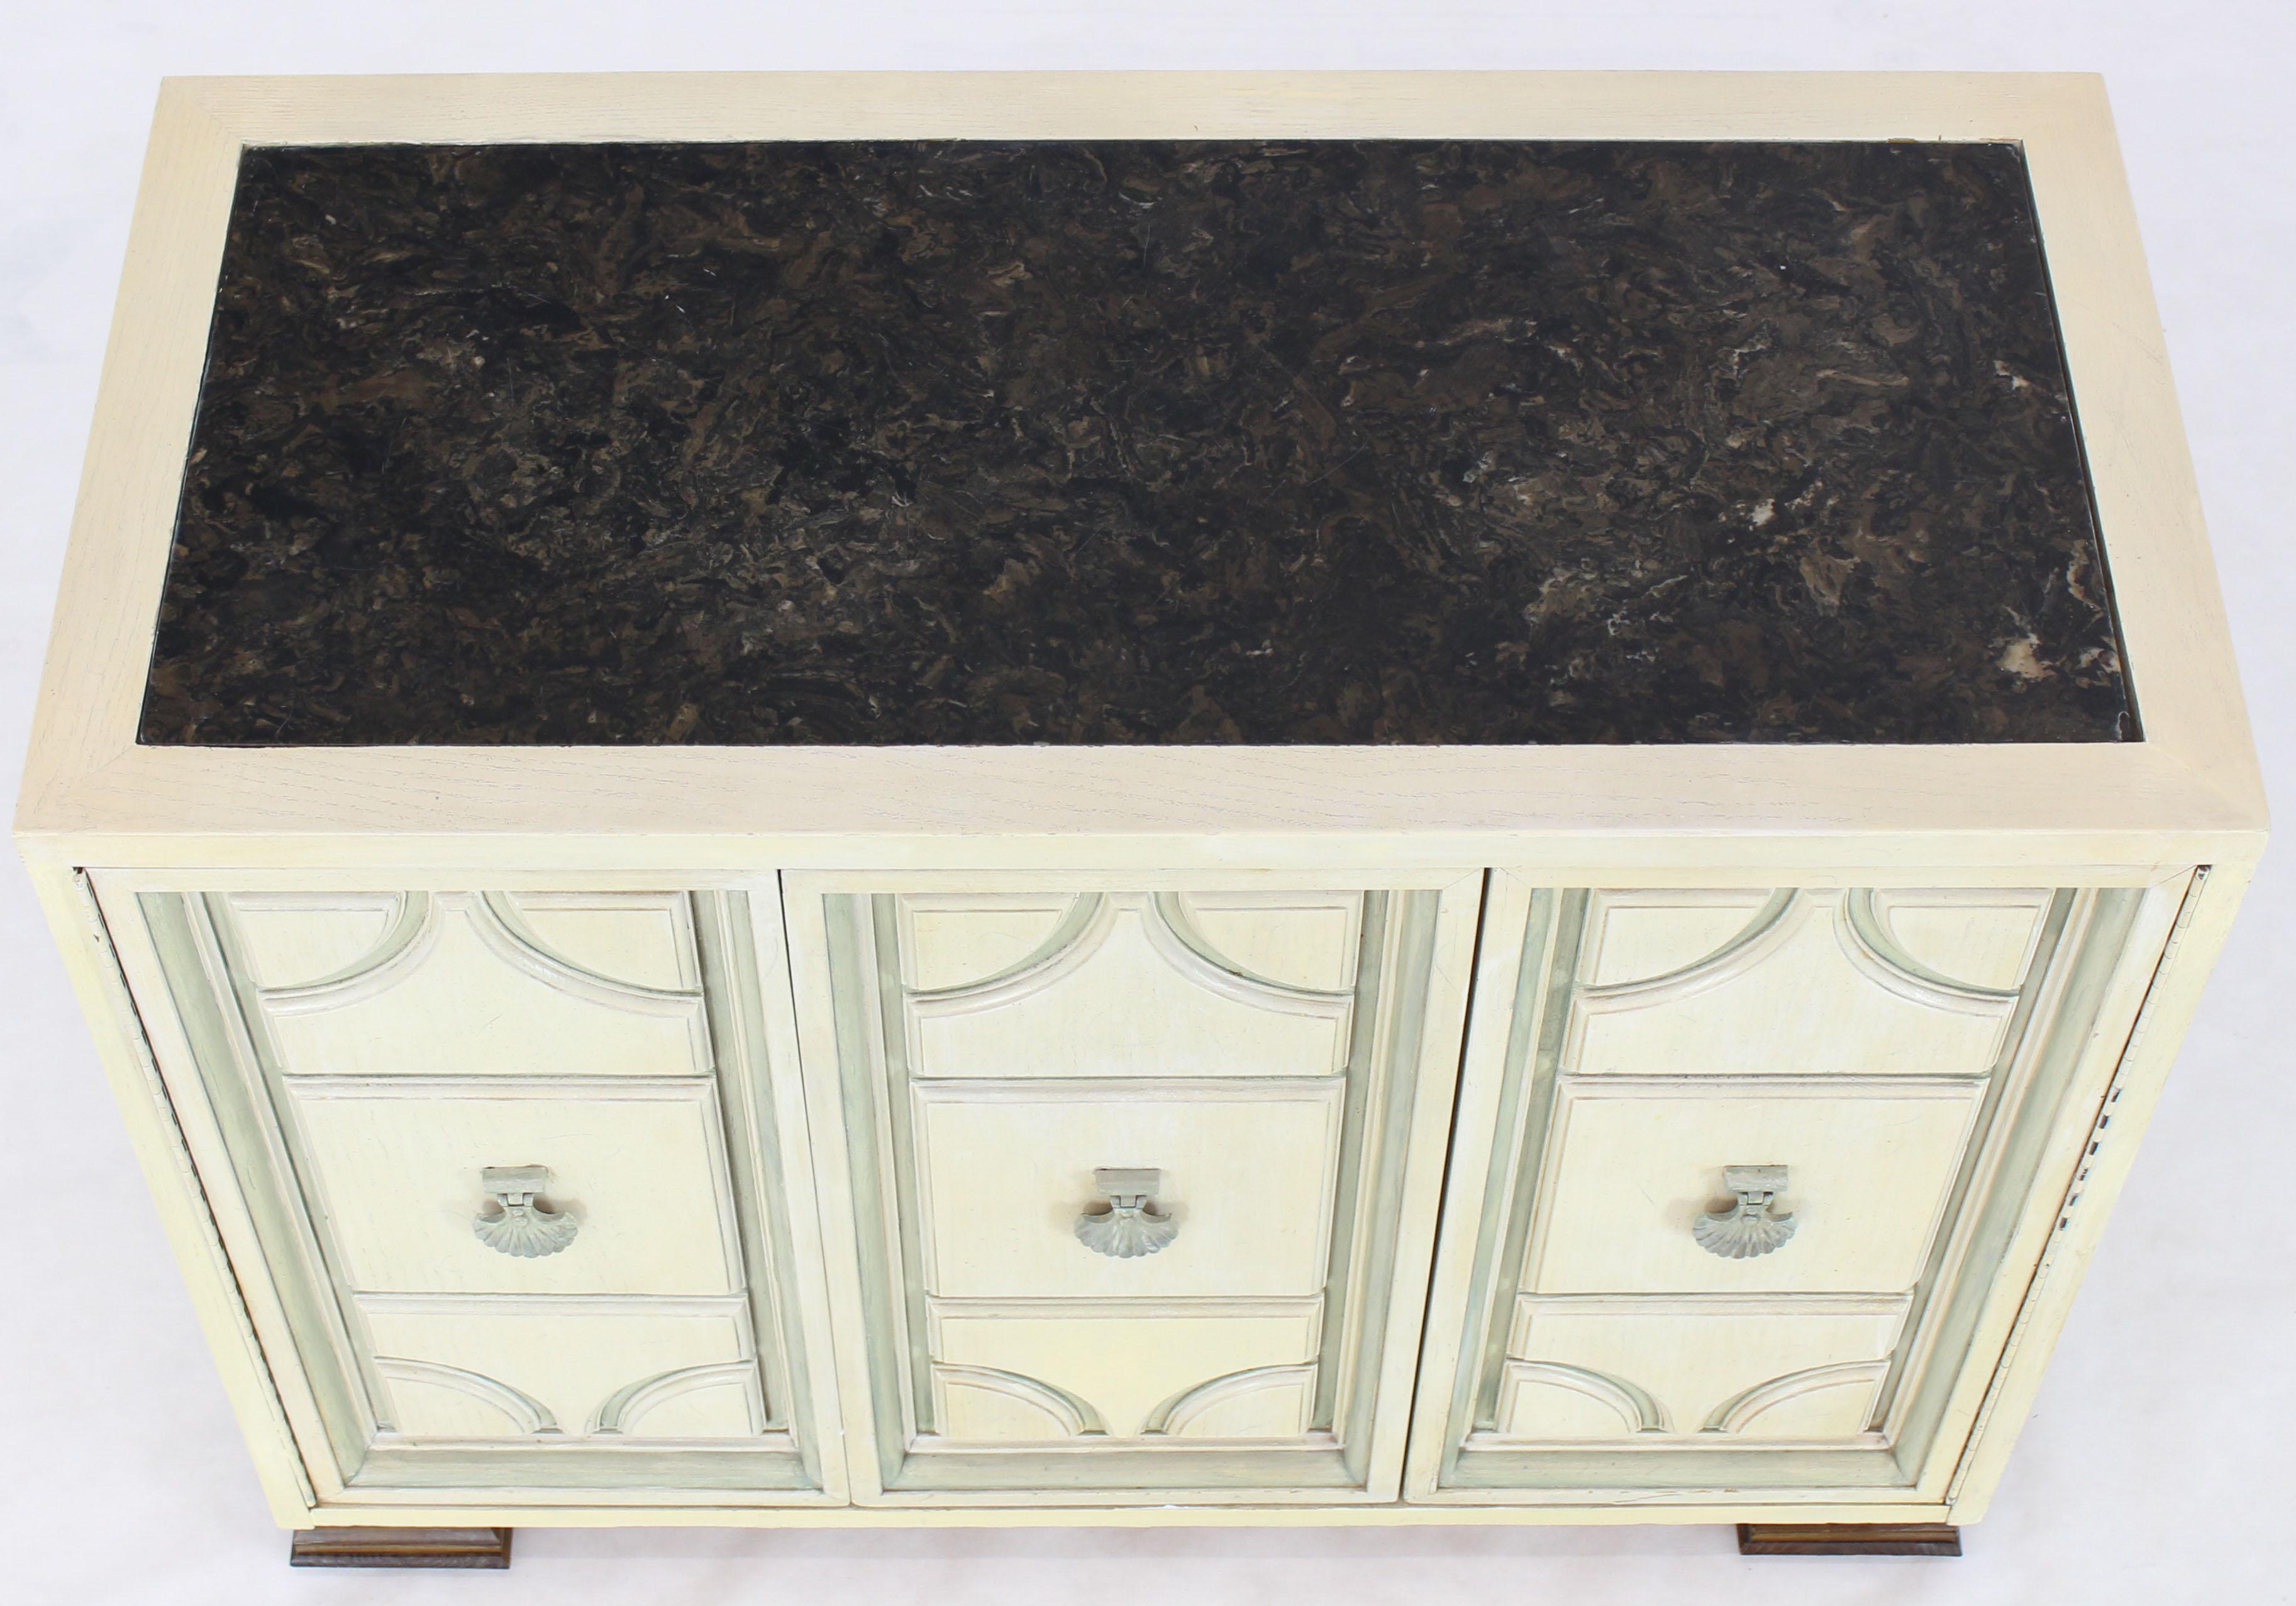 Marble Two Tone Finish Folding Doors Bachelor Chest Cabinet Dorothy Draper Style In Good Condition For Sale In Rockaway, NJ